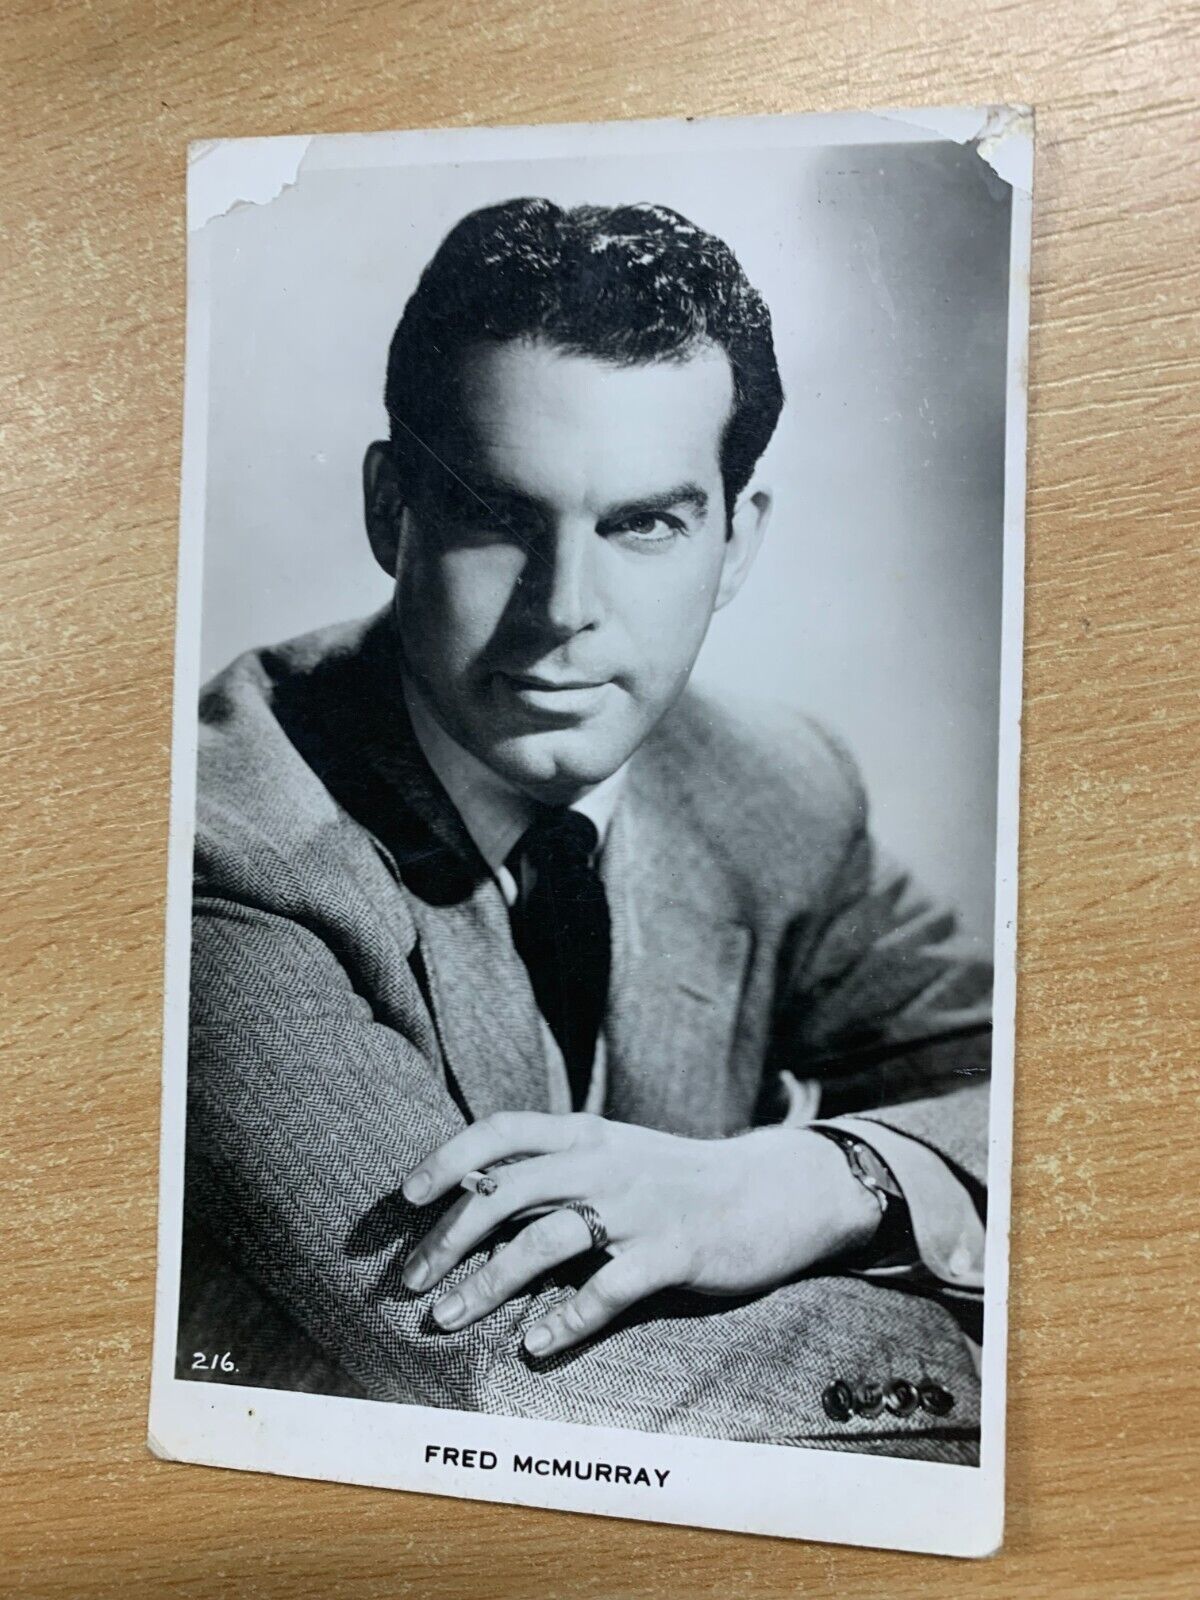 VINTAGE FRED MCMURRAY ACTOR PHOTO POSTCARD (LL)